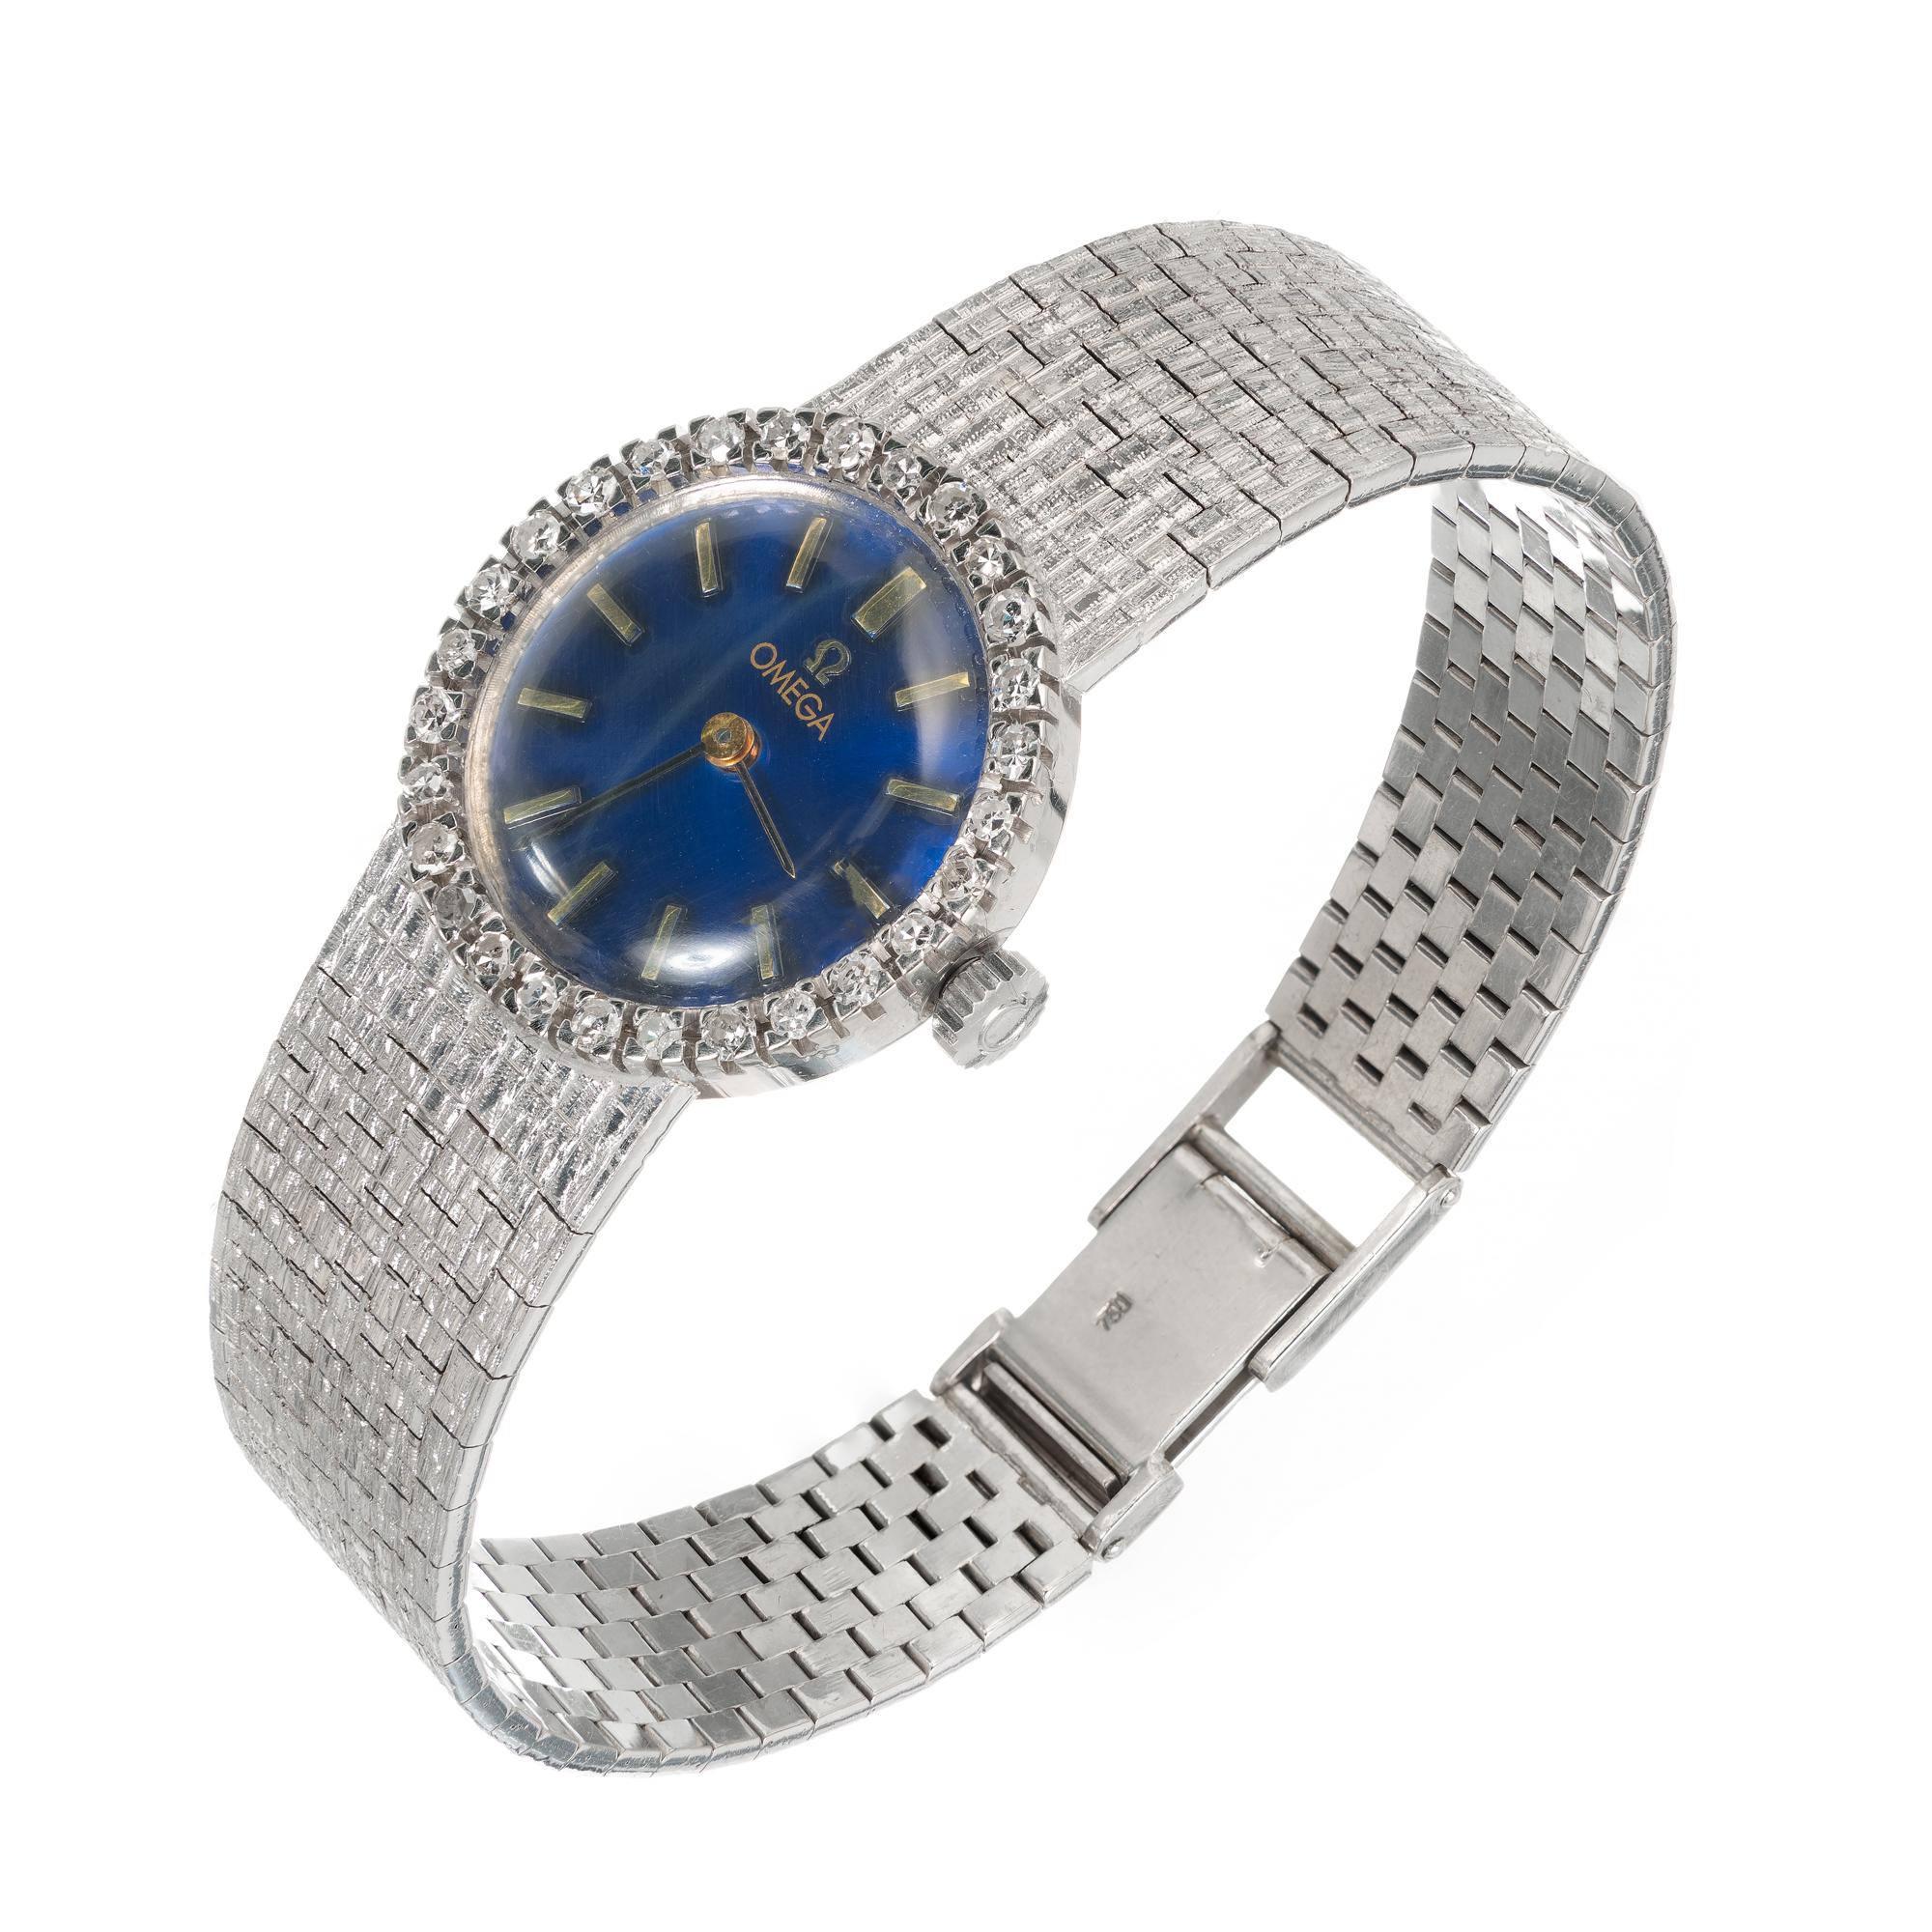 Vintage 1960's ladies Omega wristwatch in 18k white gold with diamond bezel and mesh textured band. Refinished royal blue Omega dial. 17 Jewel 620 Omega manual wind 17 jewel movement 

28 single cut diamonds 1.2-1.5mm approx total weight: .35cts 